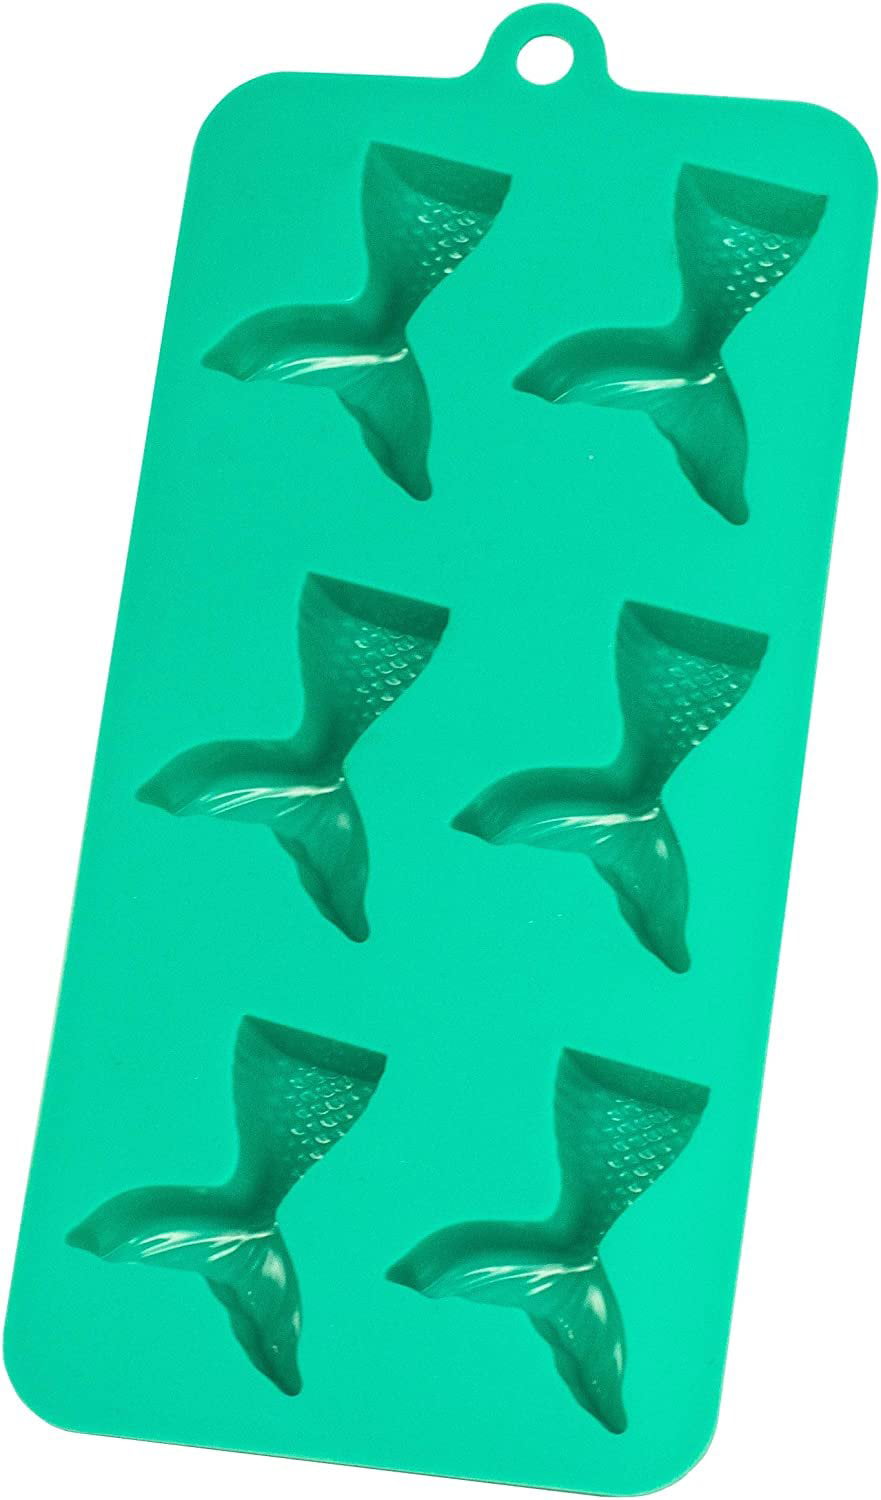 Silicone Mermaid Drink Ice Cube Gummy Mold Freezer Tray Hard Candy Edibles Maker 